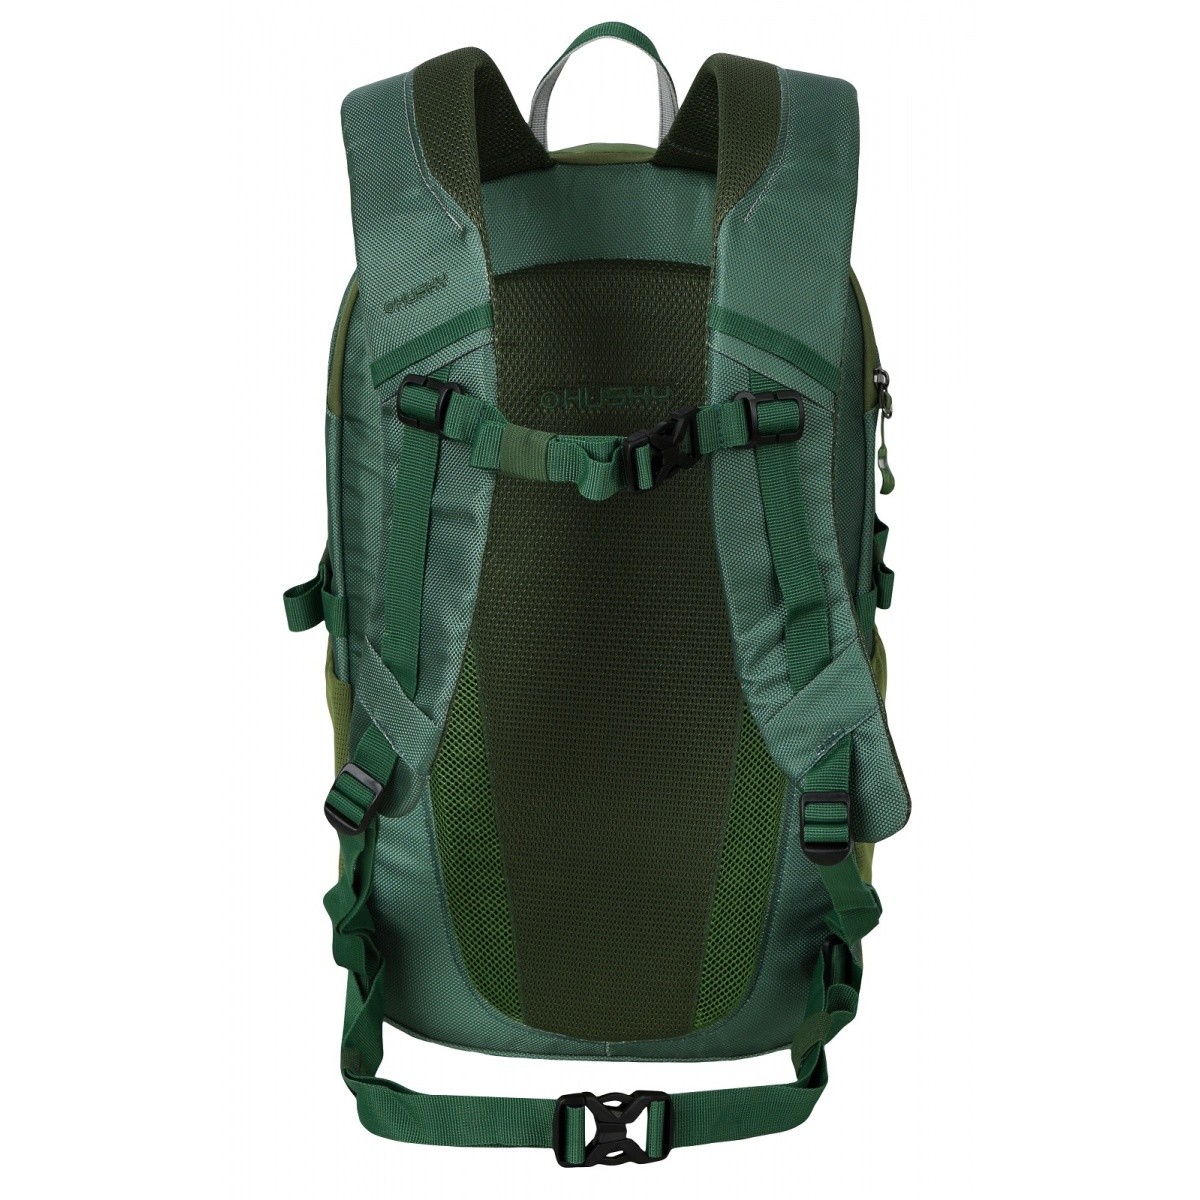 Backpack Nory 22 green HUSKY - view 4